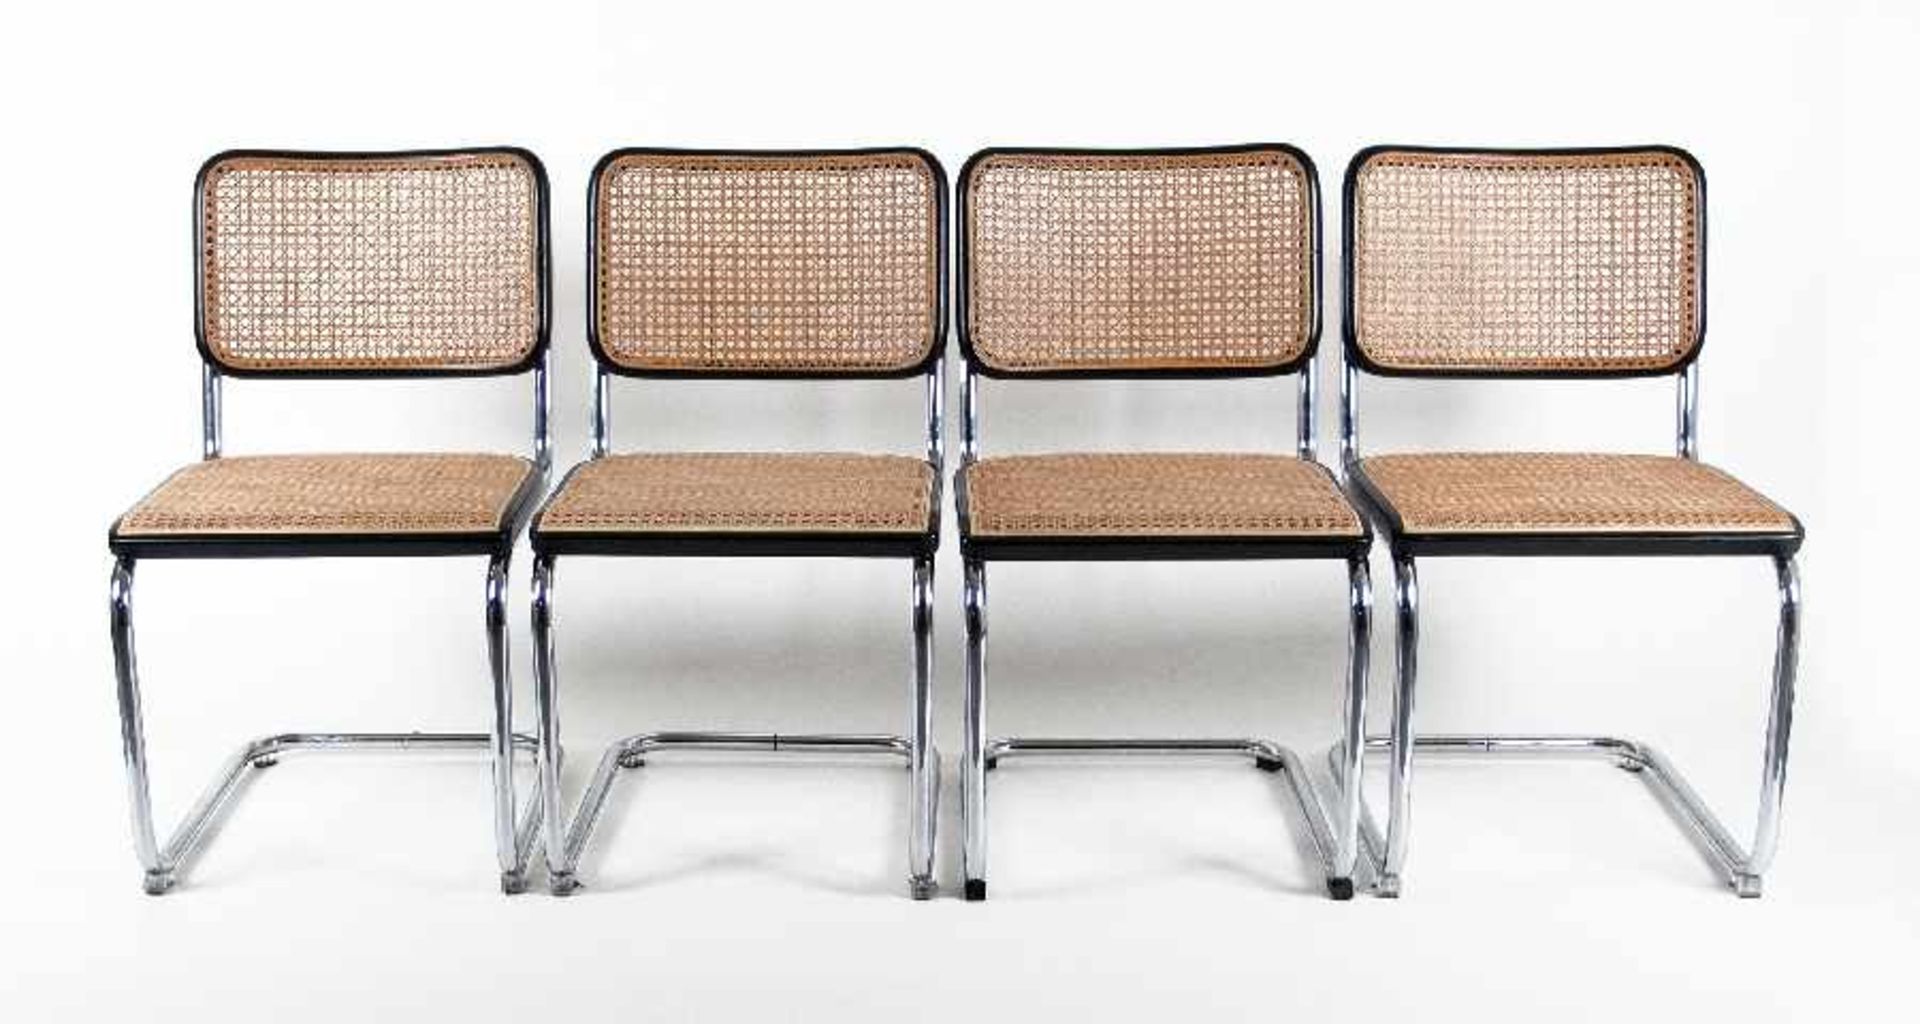 Marcel Breuer1902 - 19814 cantilever S32Chromed tubular steel, painted wood with wicker; Design